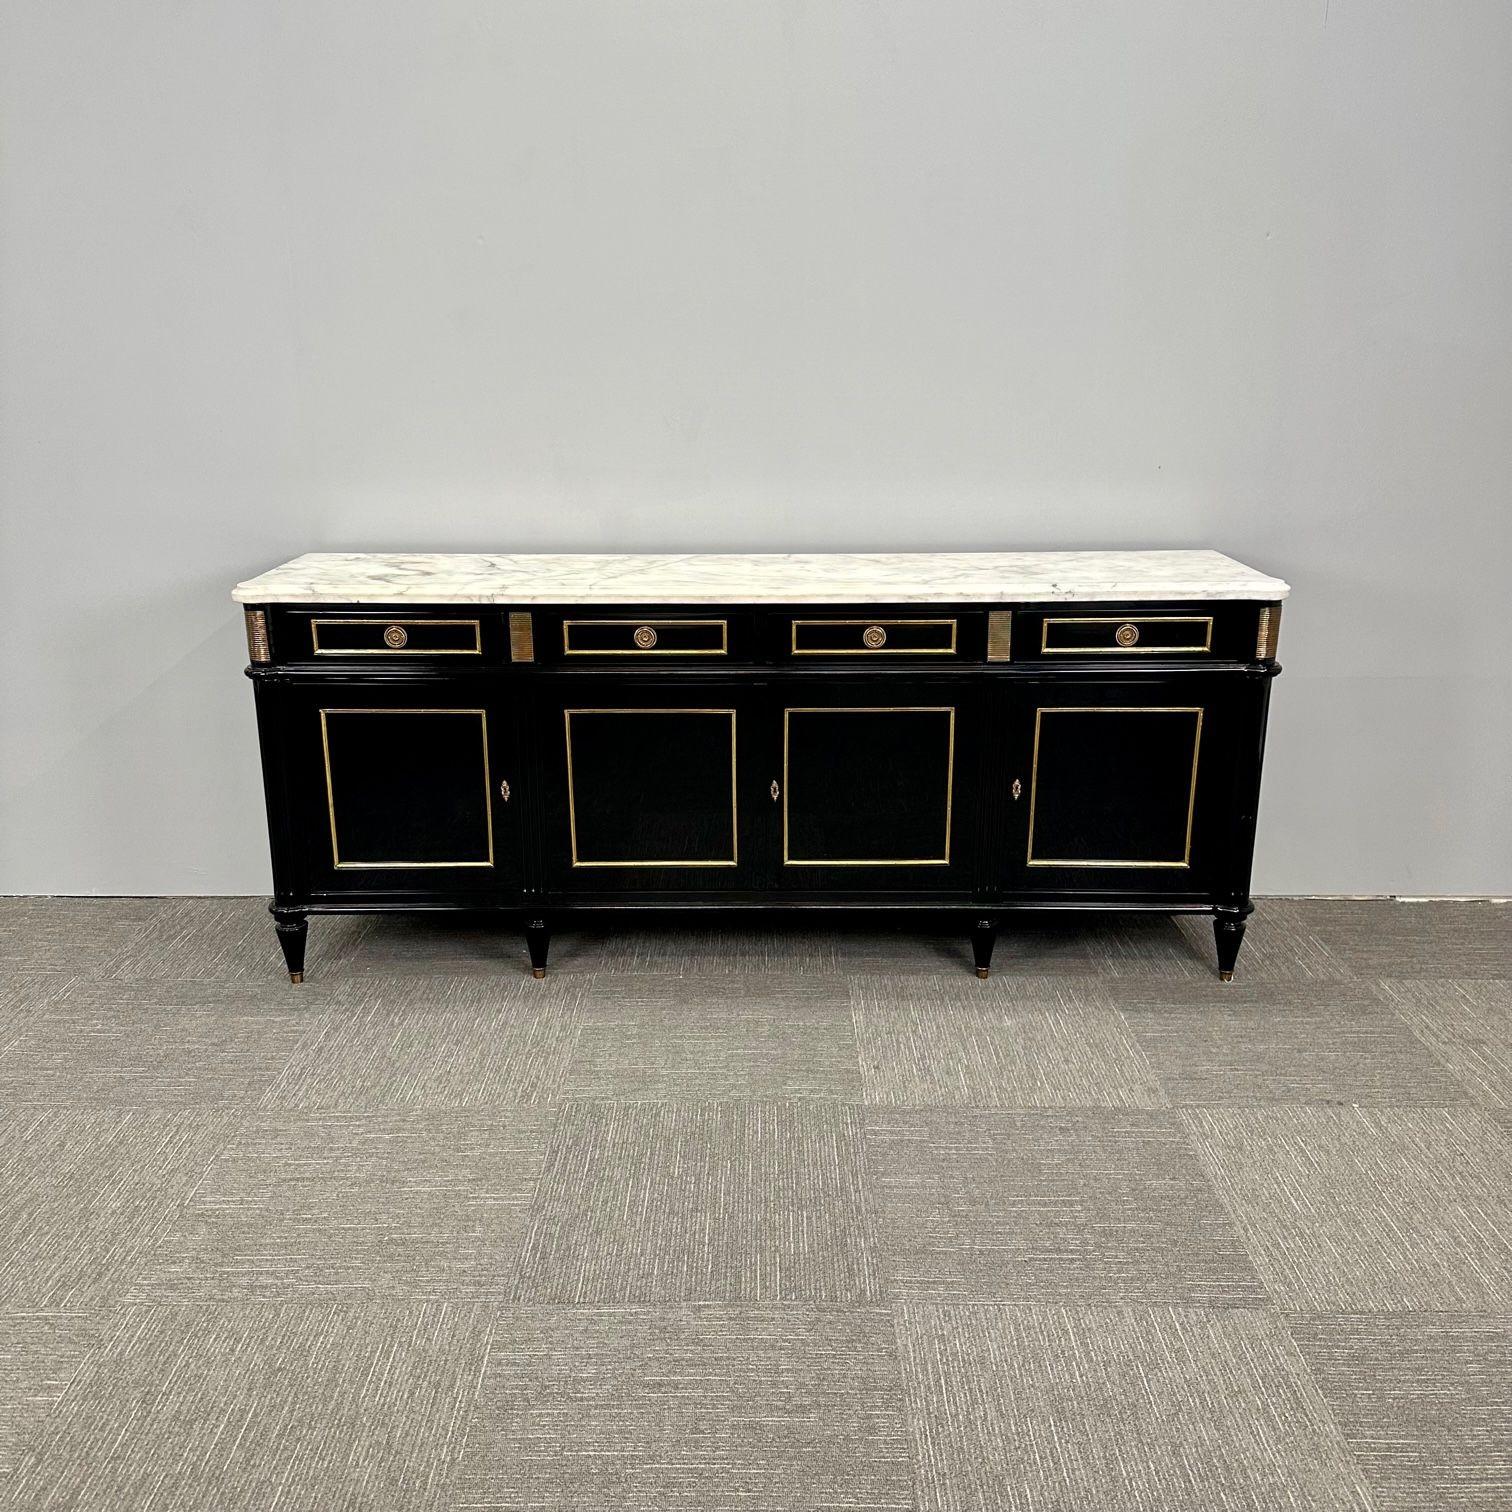 Hollywood Regency Style Black Lacquer Sideboard / Credenza , Maison Jansen Style, Bronze, Marble
A simply stunning palatial sideboard or credenza in the fashion of Maison Jansen. This newly ebonized bronze mounted sideboard having a bronze box